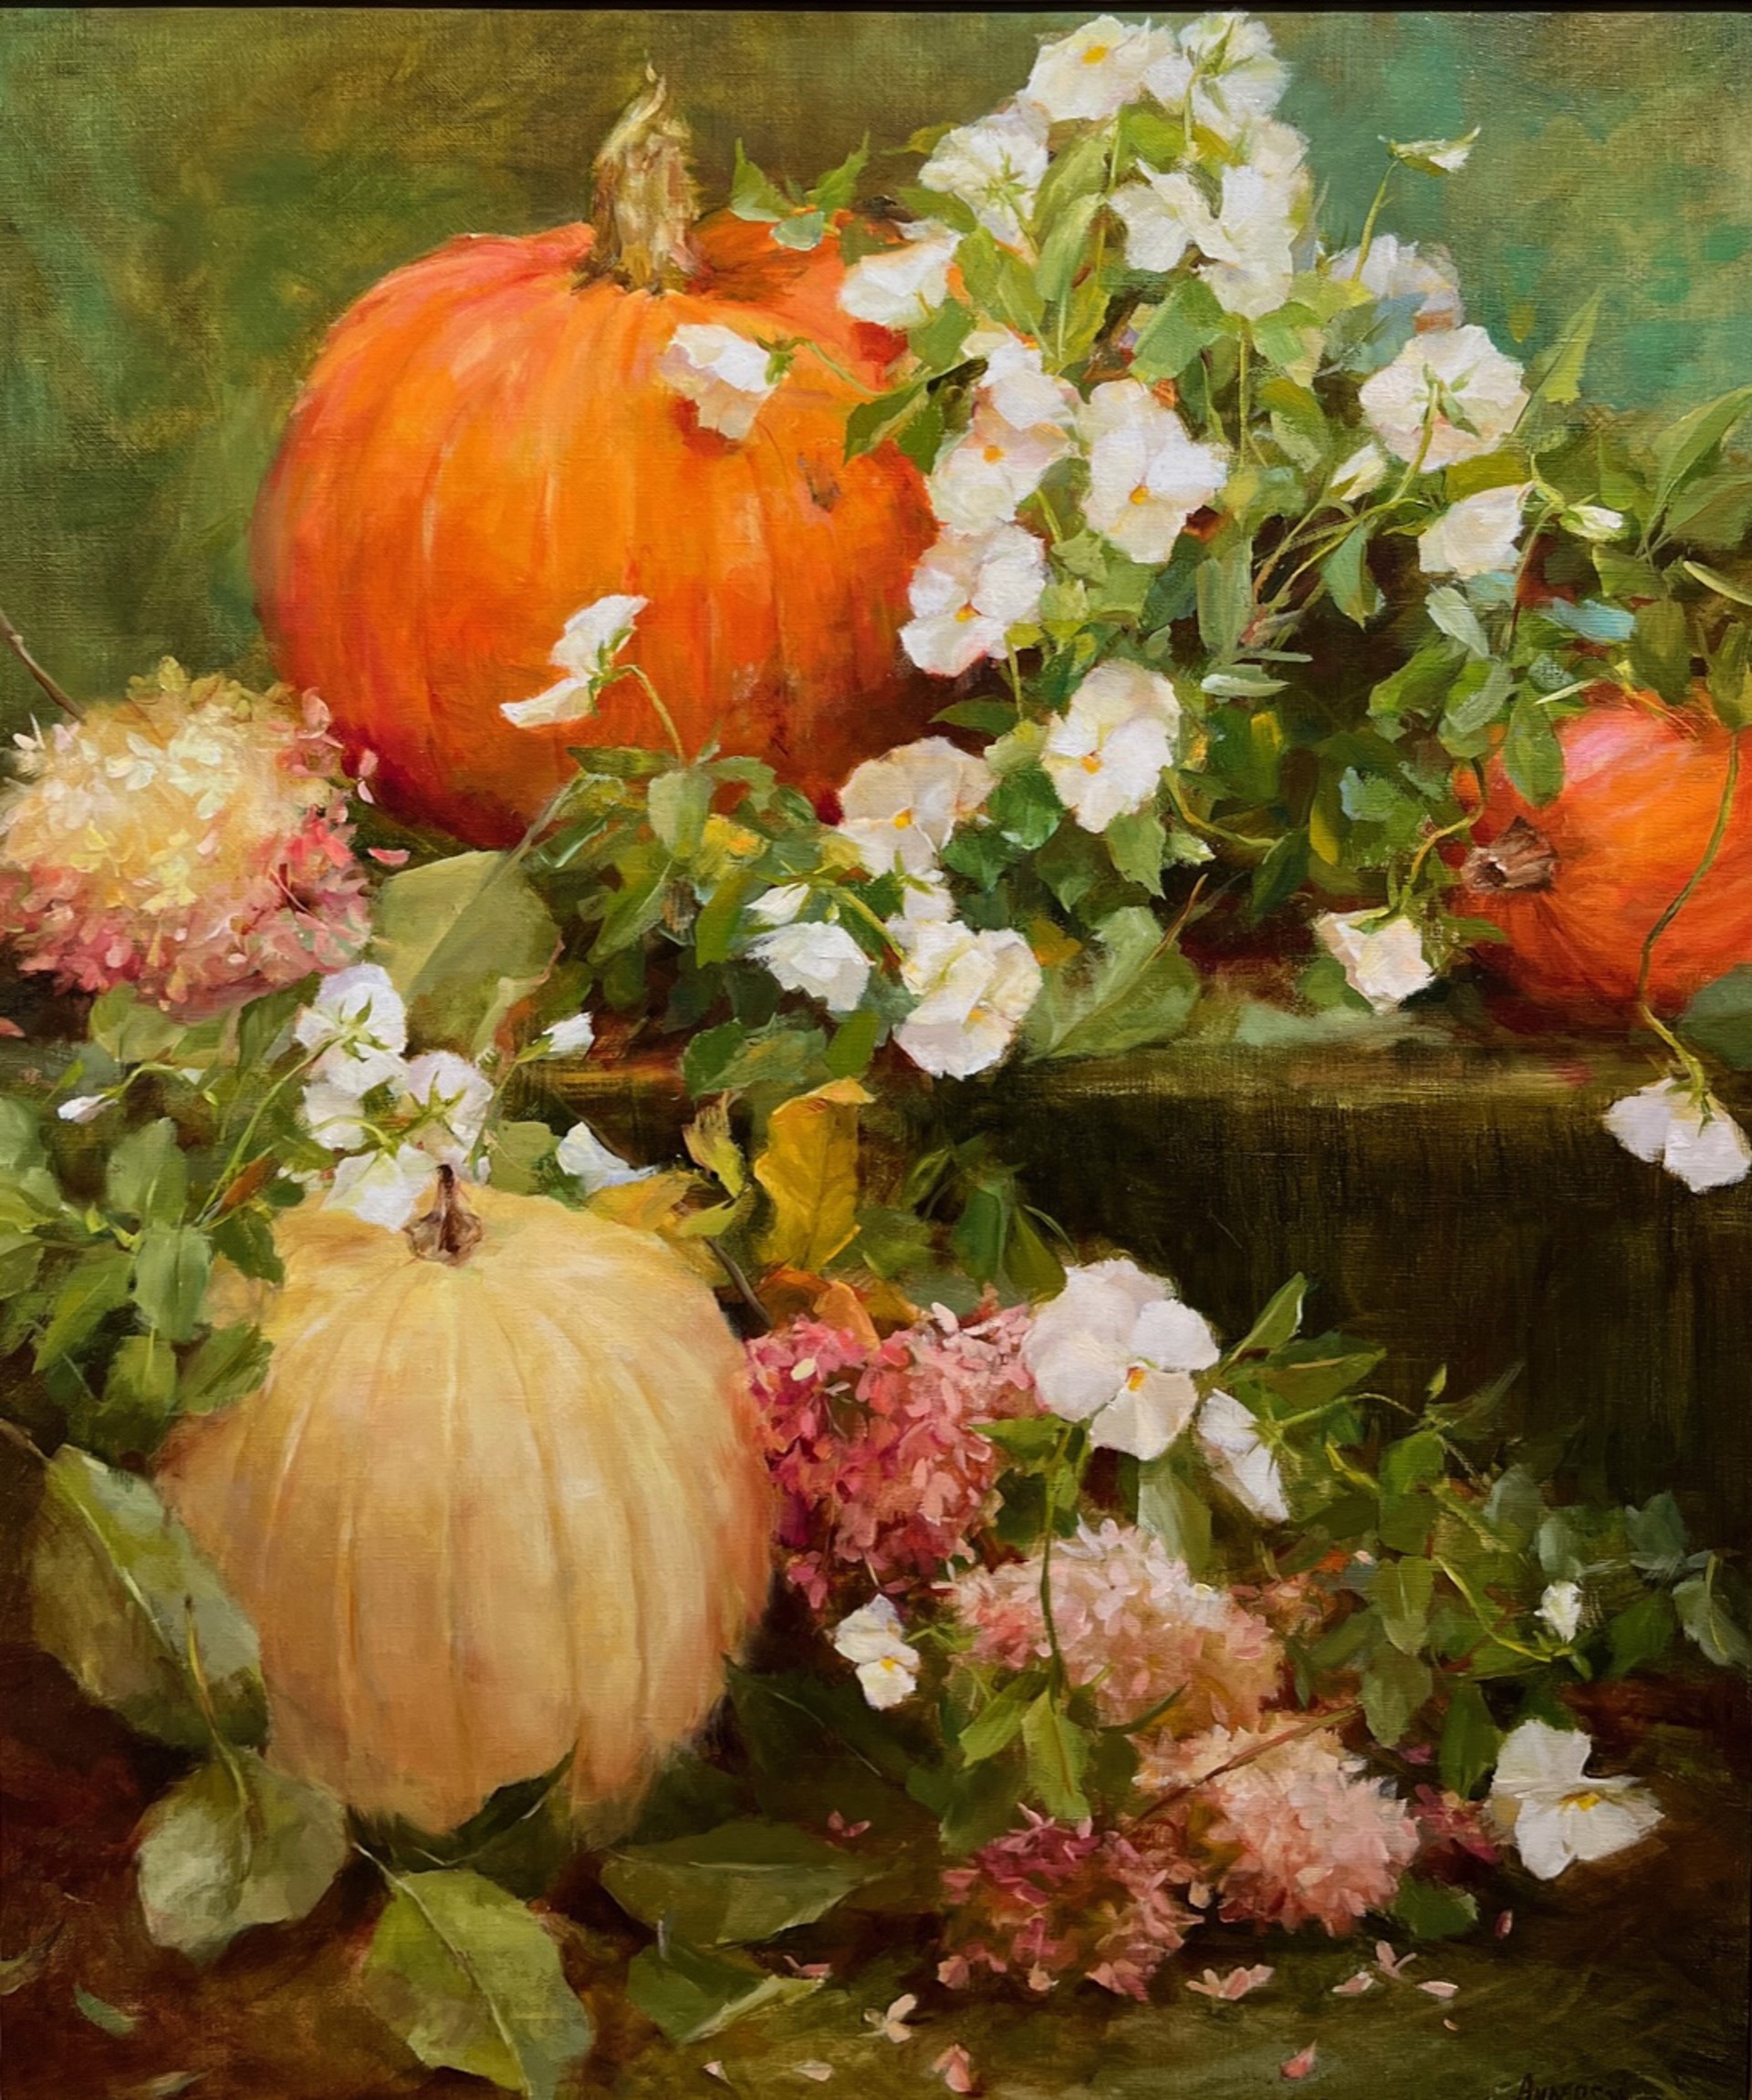 Pumpkins and White Pansies by Kathy Anderson